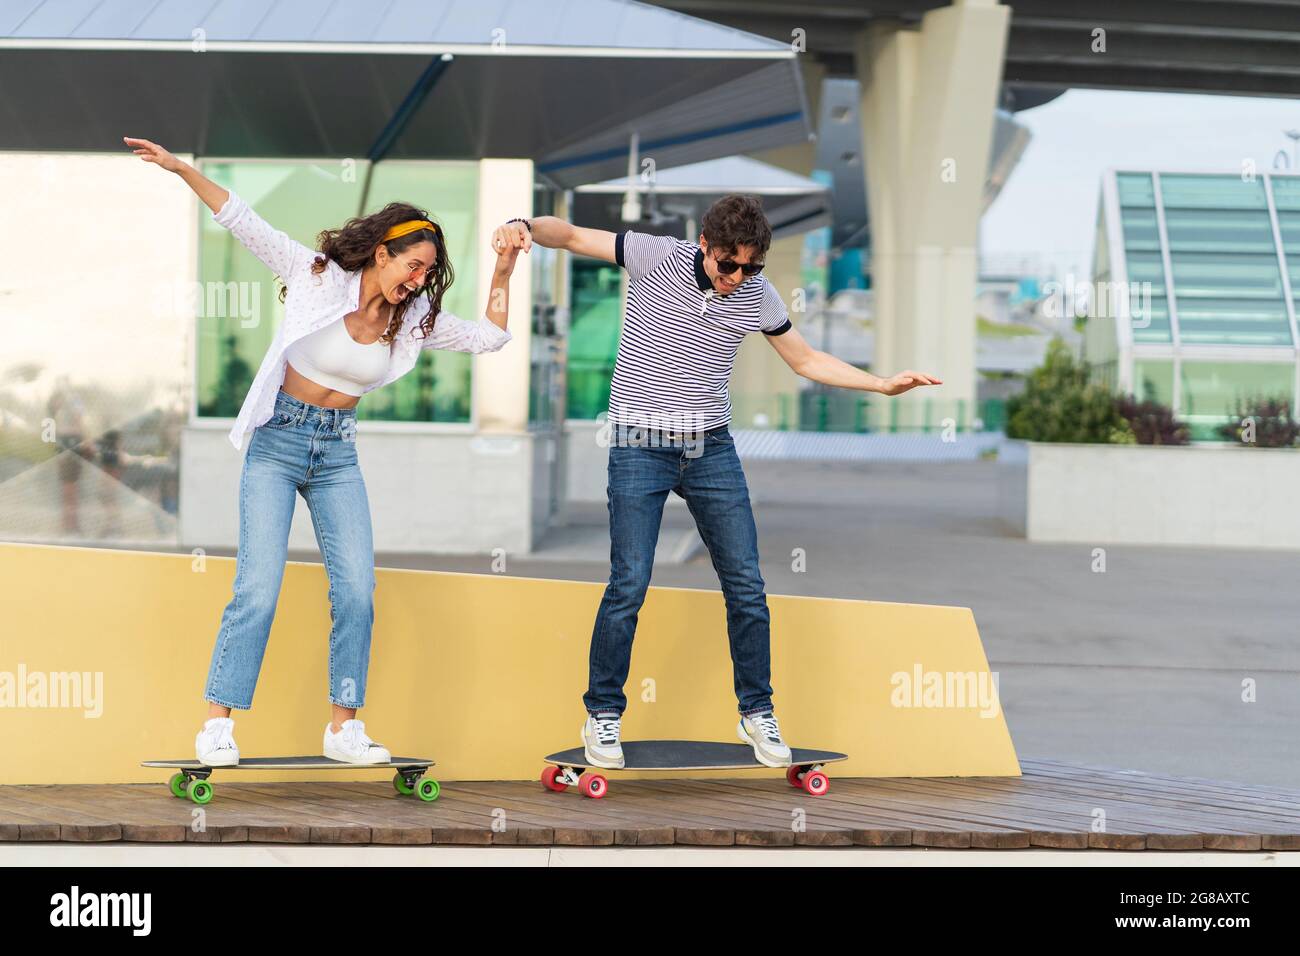 Active young skaters couple learn to ride longboard together hold hands laughing stand on skateboard Stock Photo